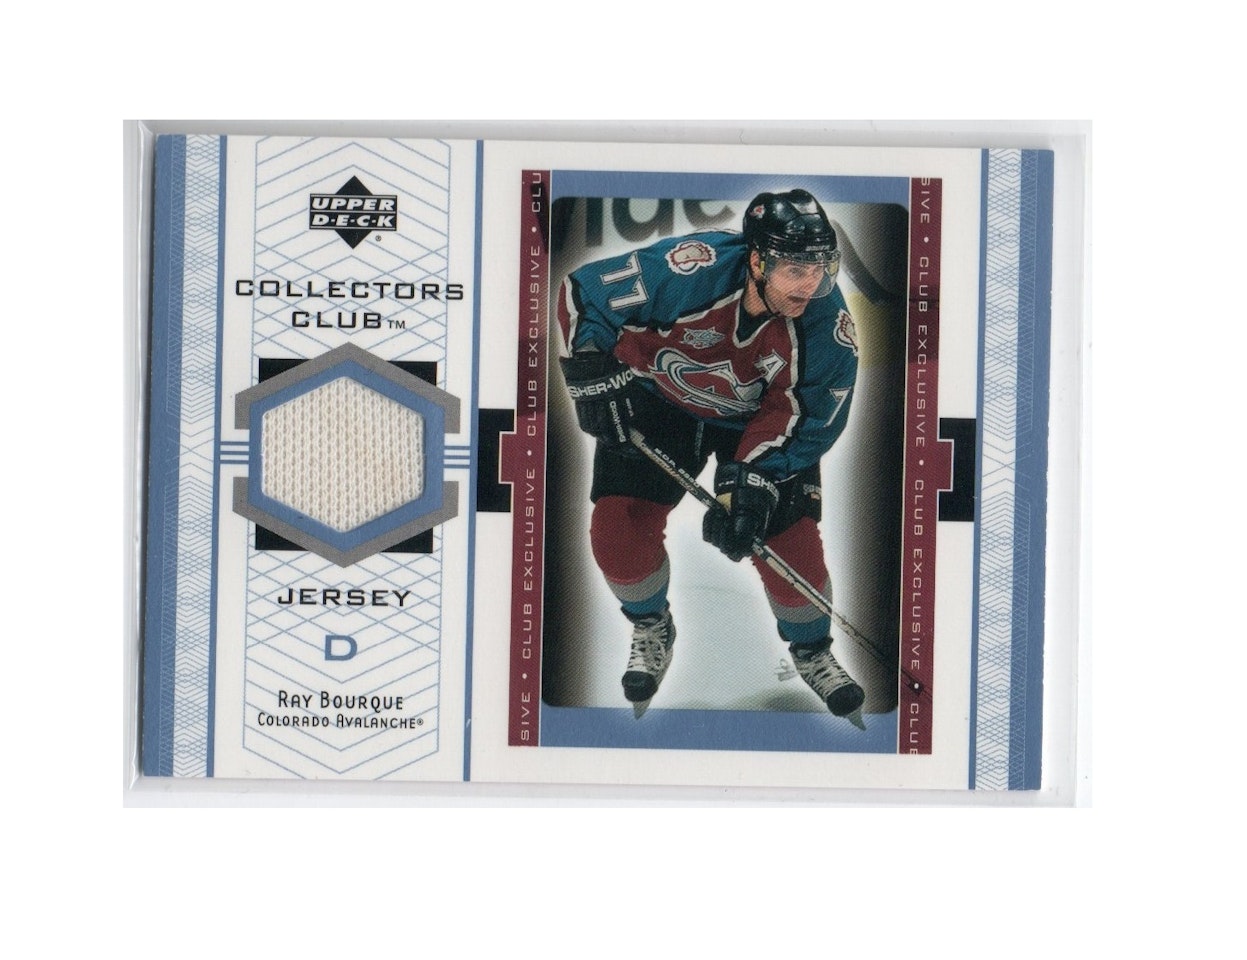 2002 Upper Deck Collectors Club Jerseys #RBJ Ray Bourque (100-X231-AVALANCHE)